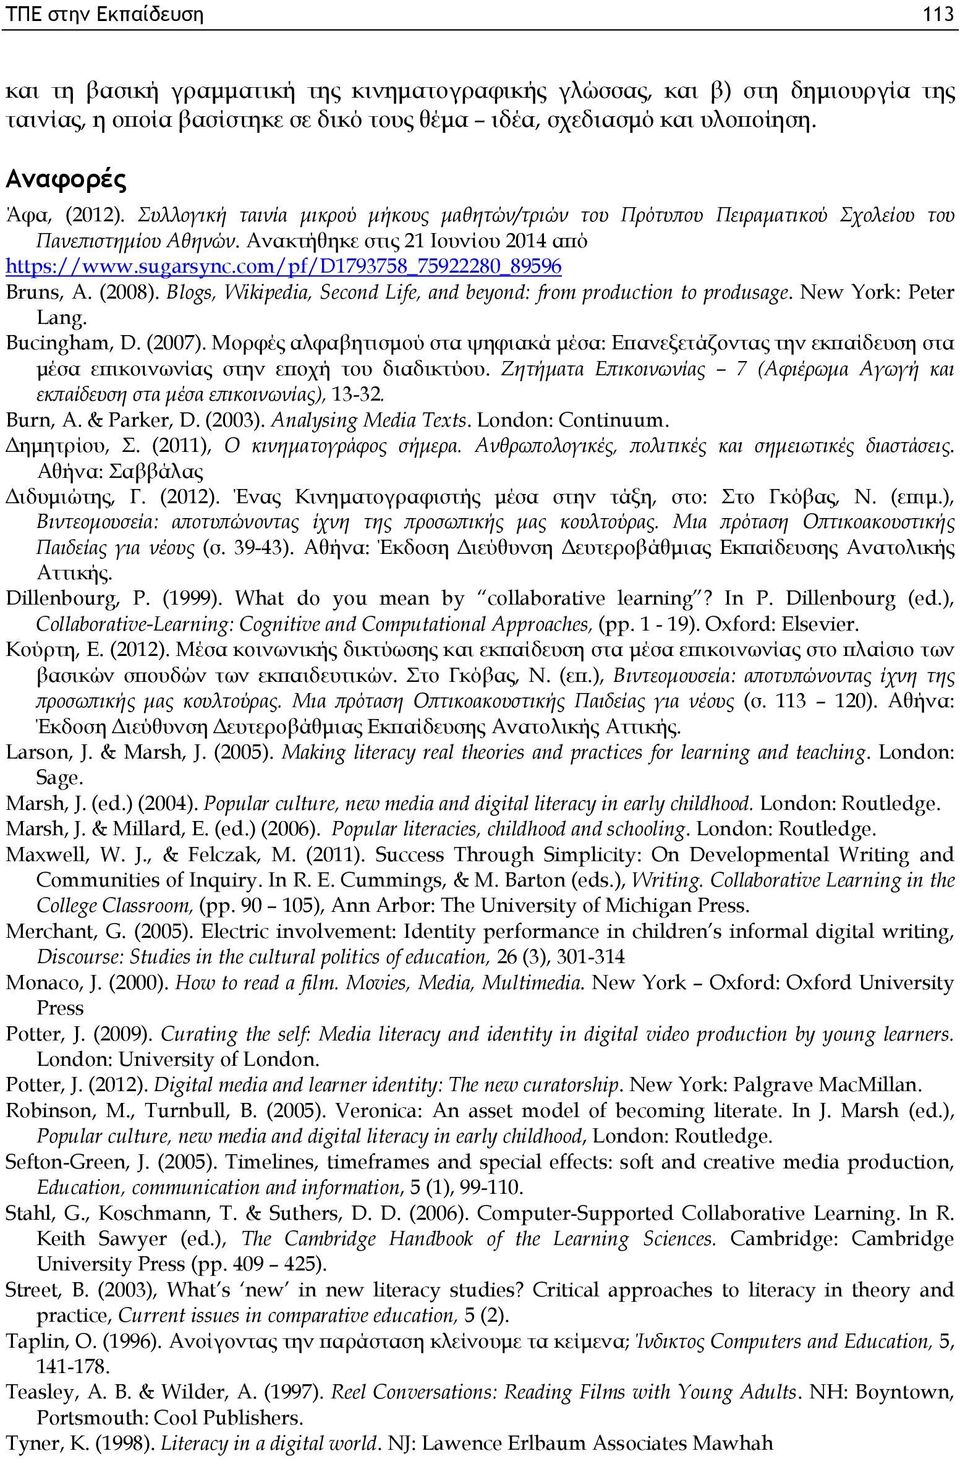 com/pf/d1793758_75922280_89596 Bruns, A. (2008). Blogs, Wikipedia, Second Life, and beyond: from production to produsage. New York: Peter Lang. Bucingham, D. (2007).